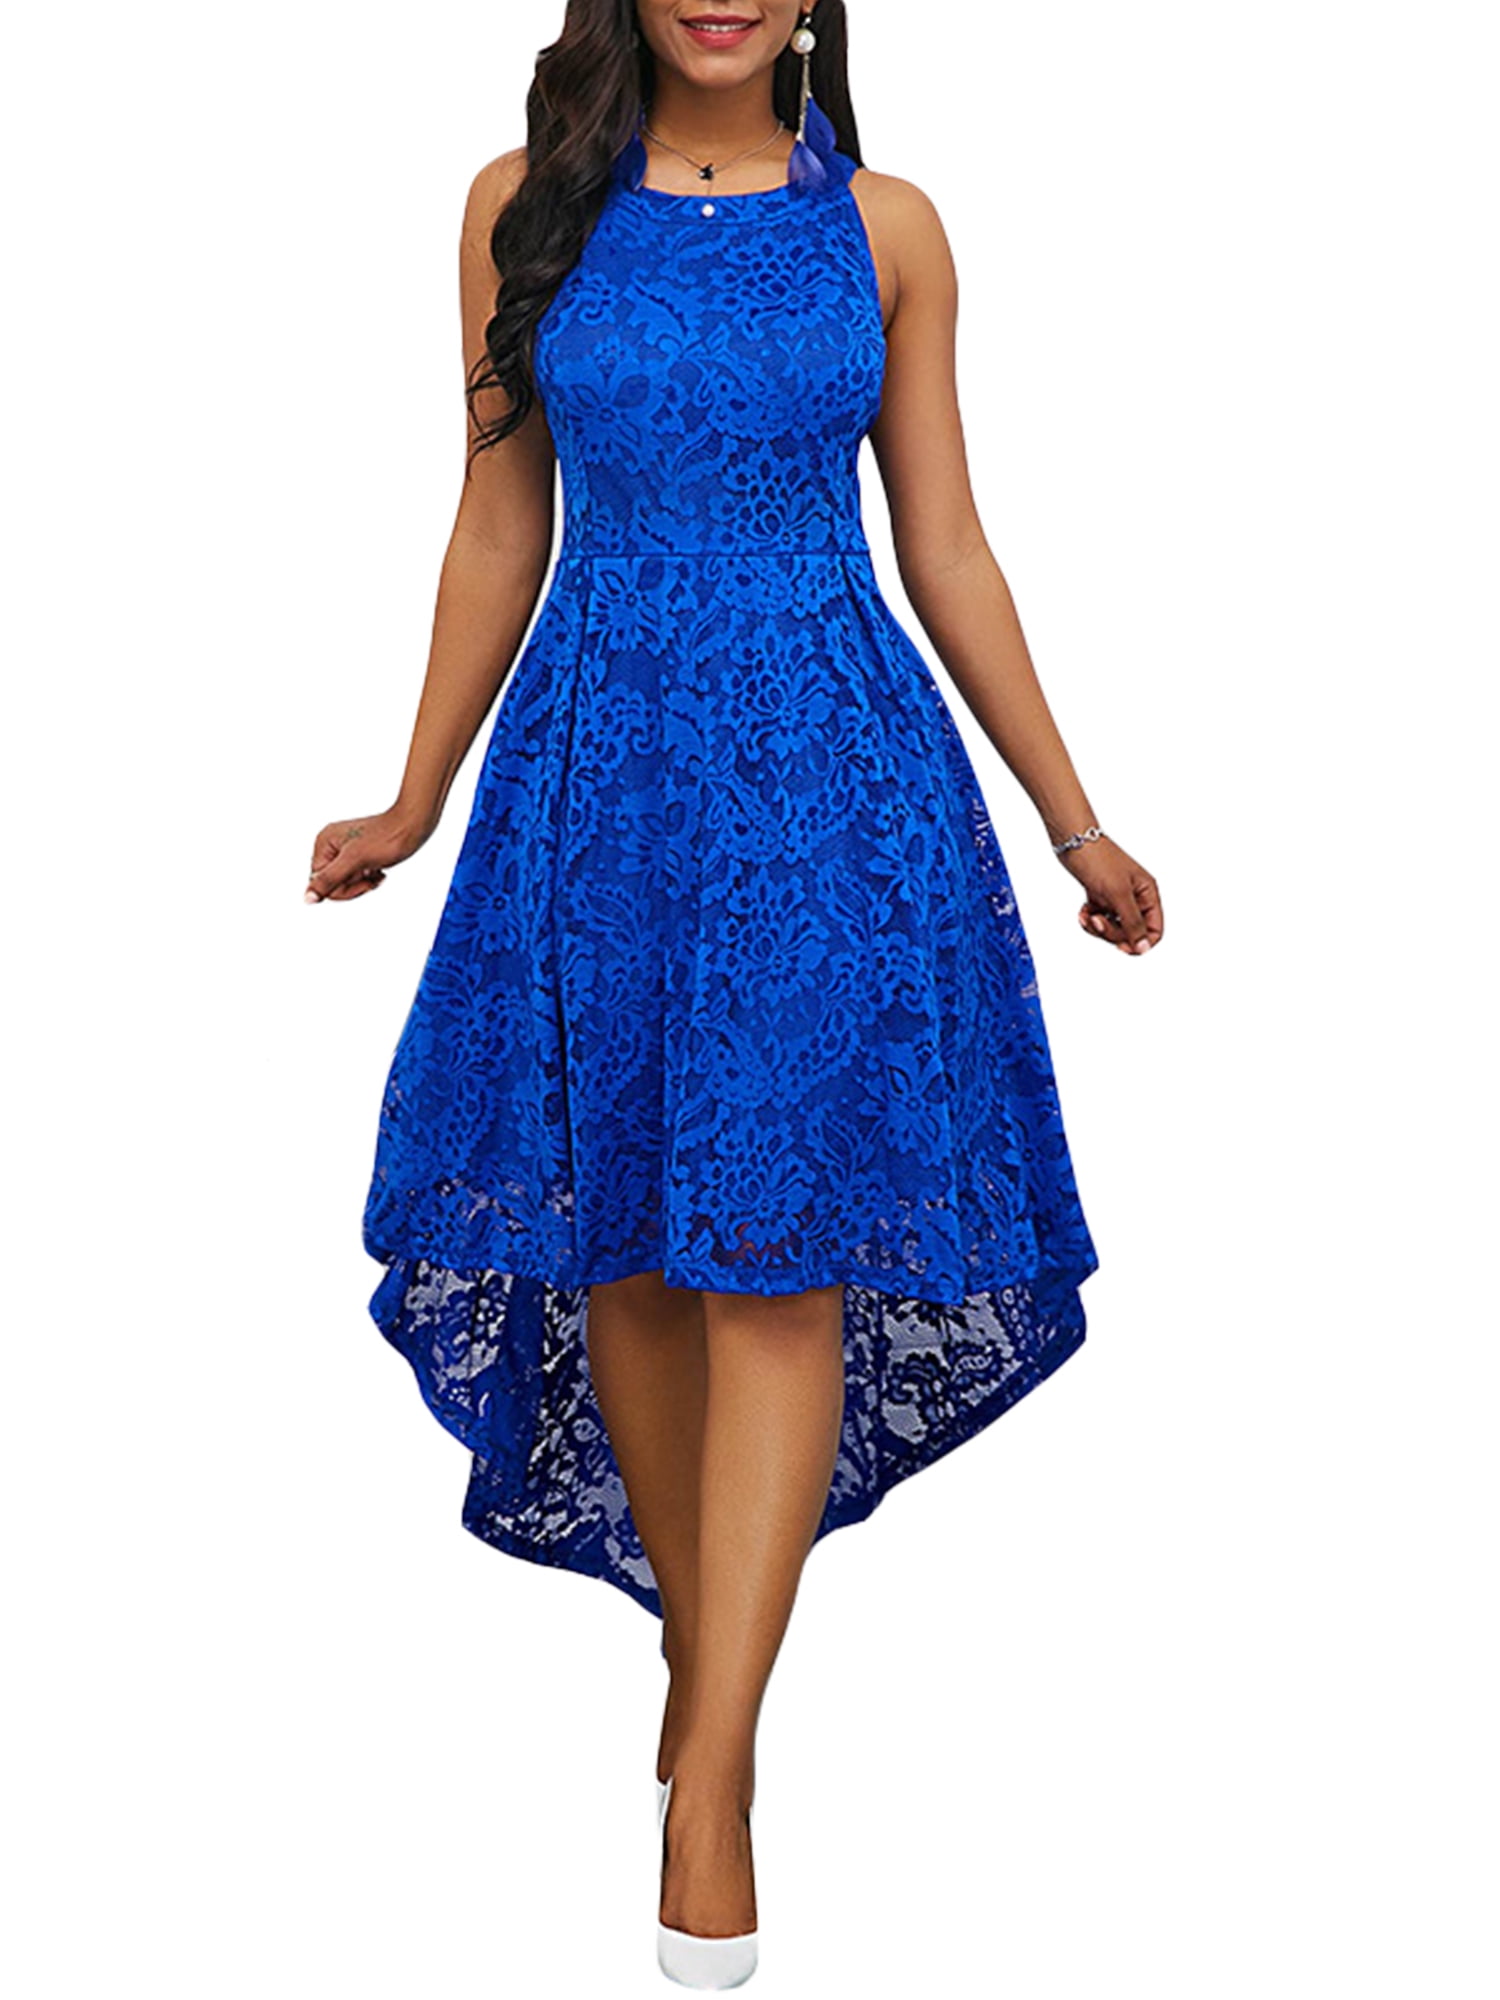 Sexy Dance - Plus Size Lace Swing Dresses for Women Off Shoulder ...